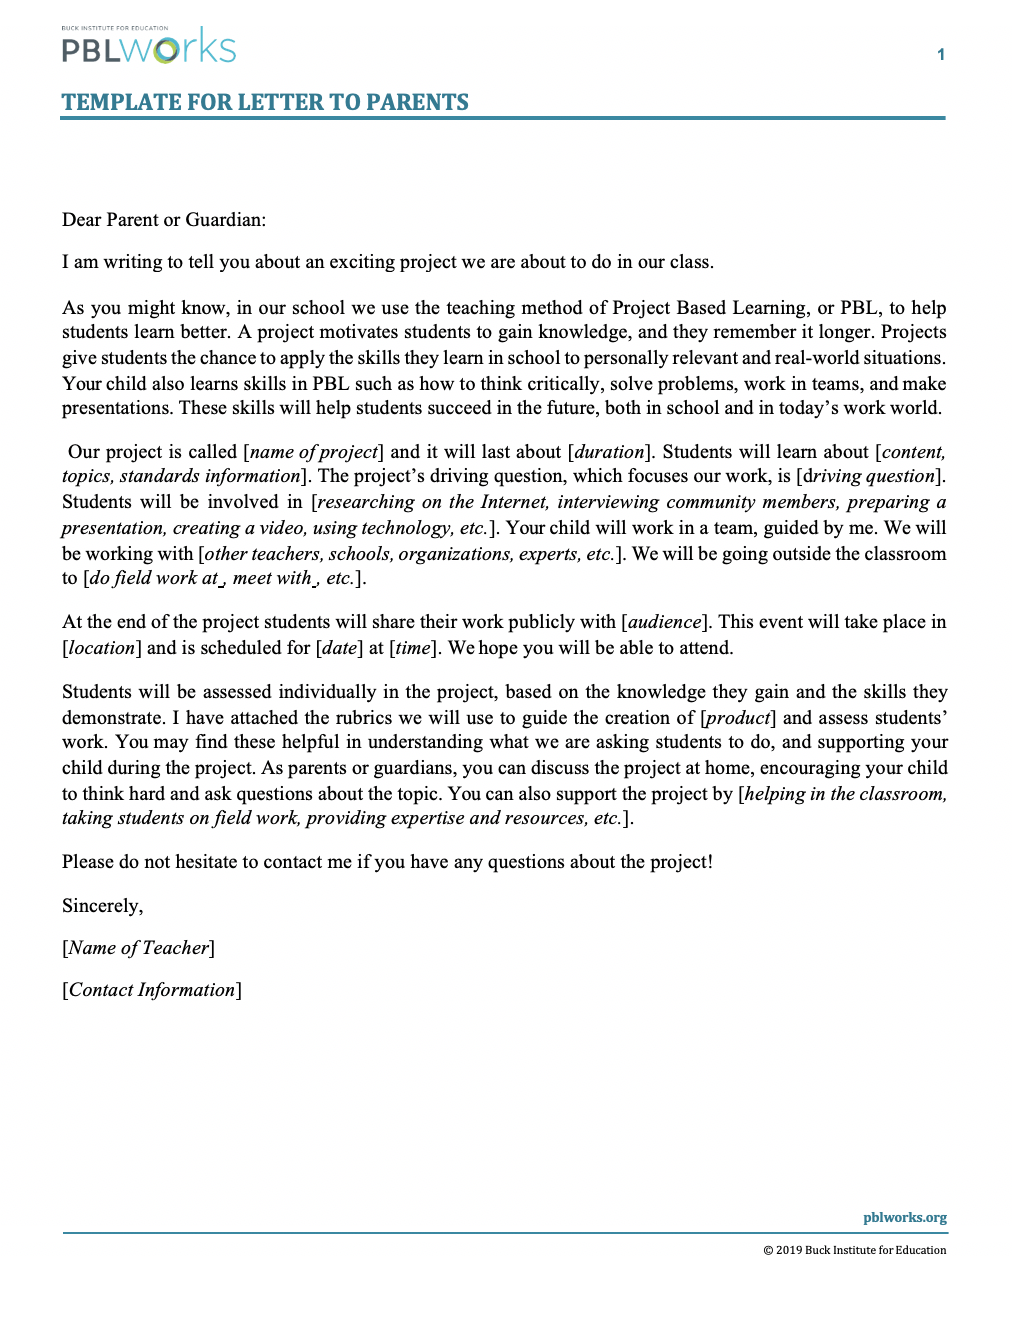 Template for Letter to Parents  MyPBLWorks With Letter To Parents Template From Teachers